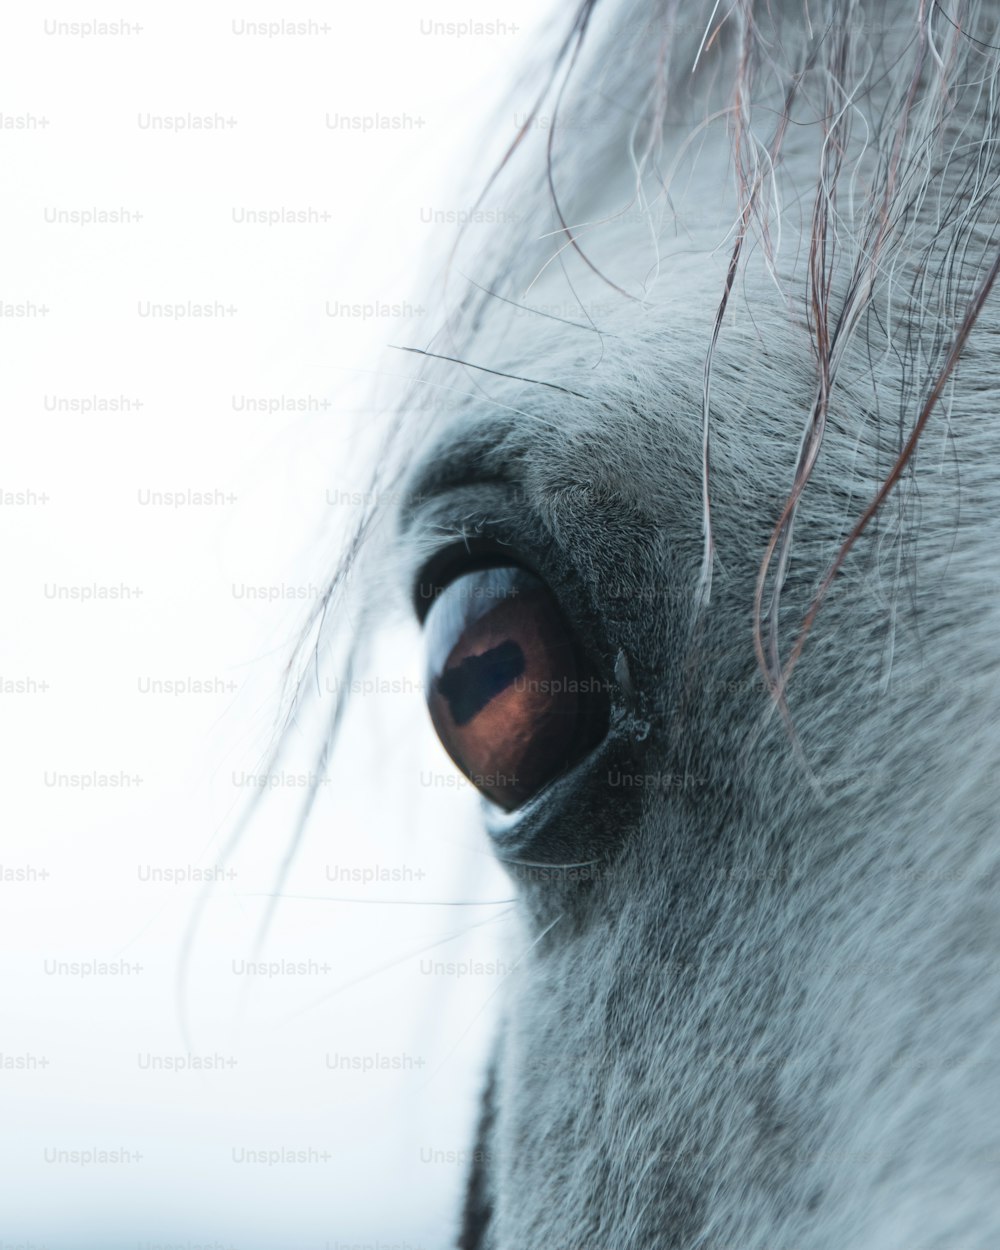 a close up of a white horse's eye